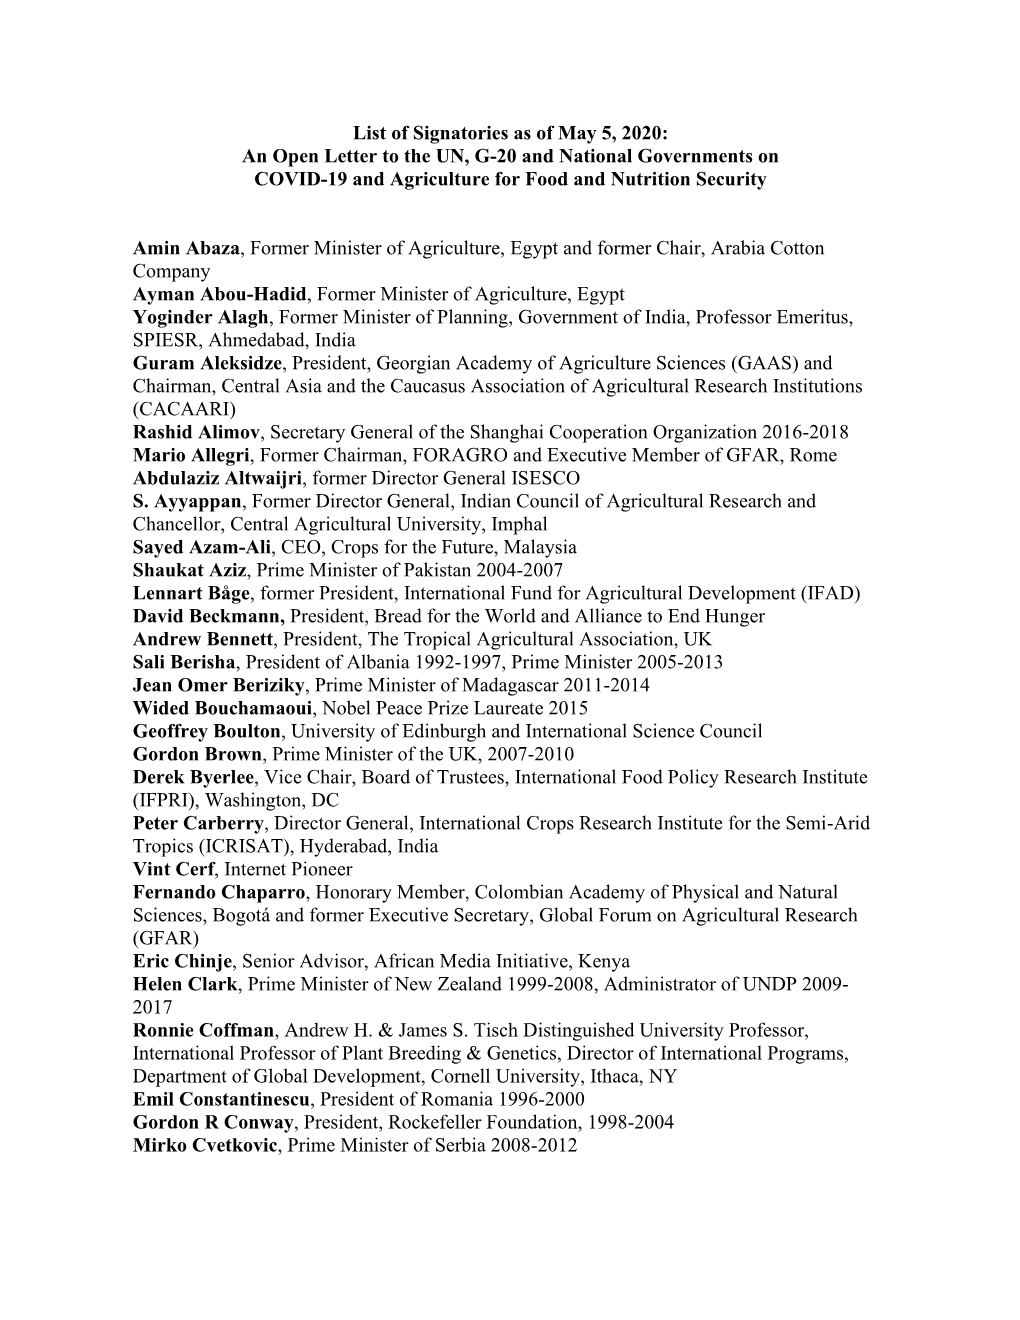 List of Signatories As of May 5, 2020: an Open Letter to the UN, G-20 and National Governments on COVID-19 and Agriculture for Food and Nutrition Security